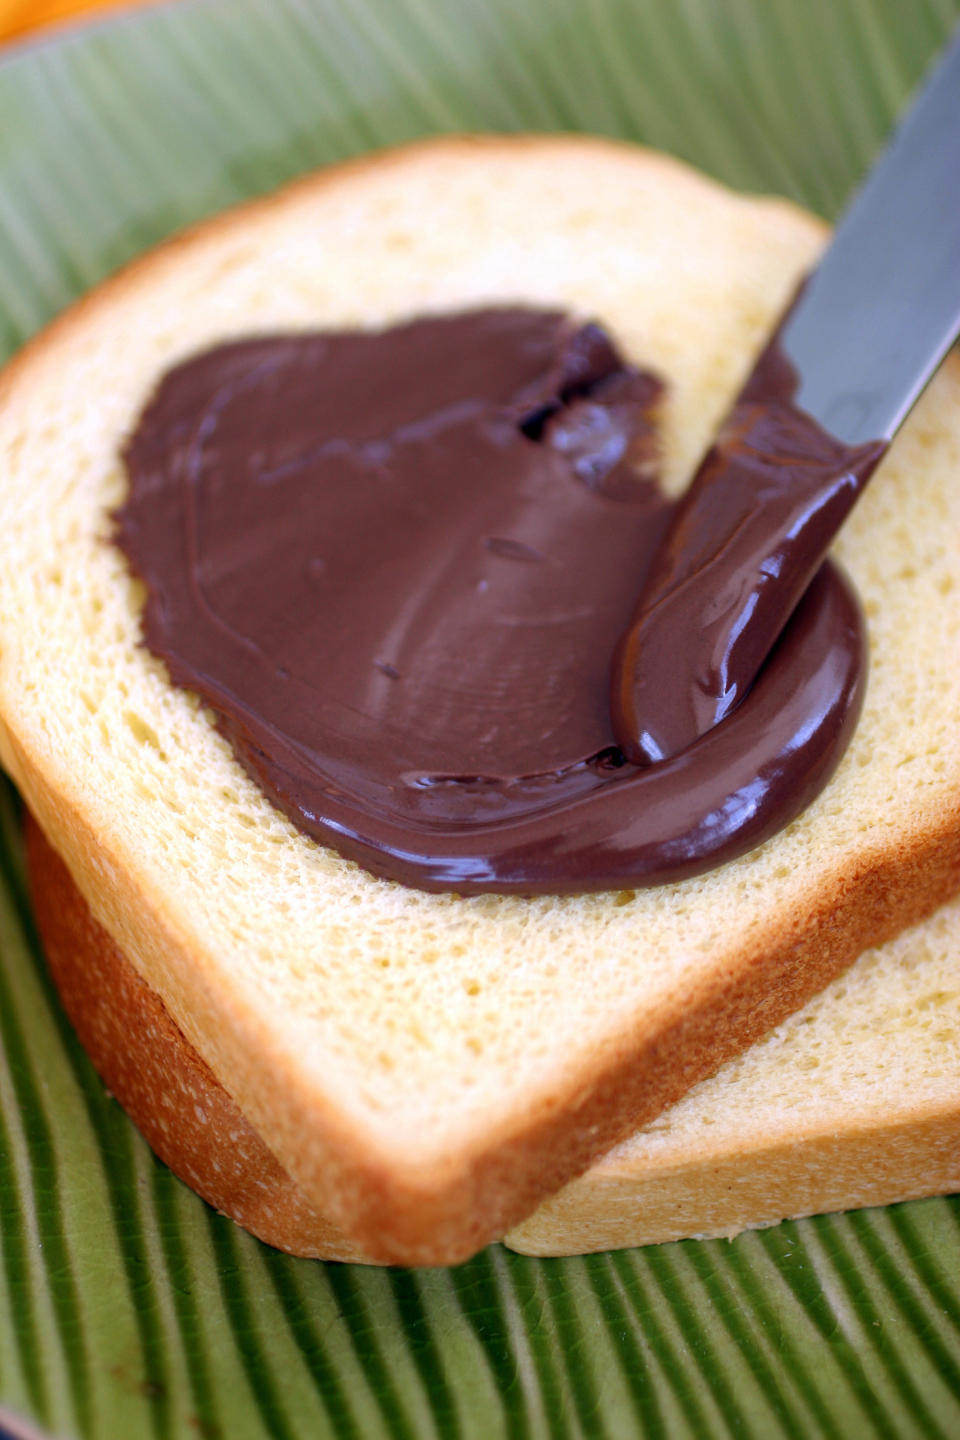 Sliced bread with nutella